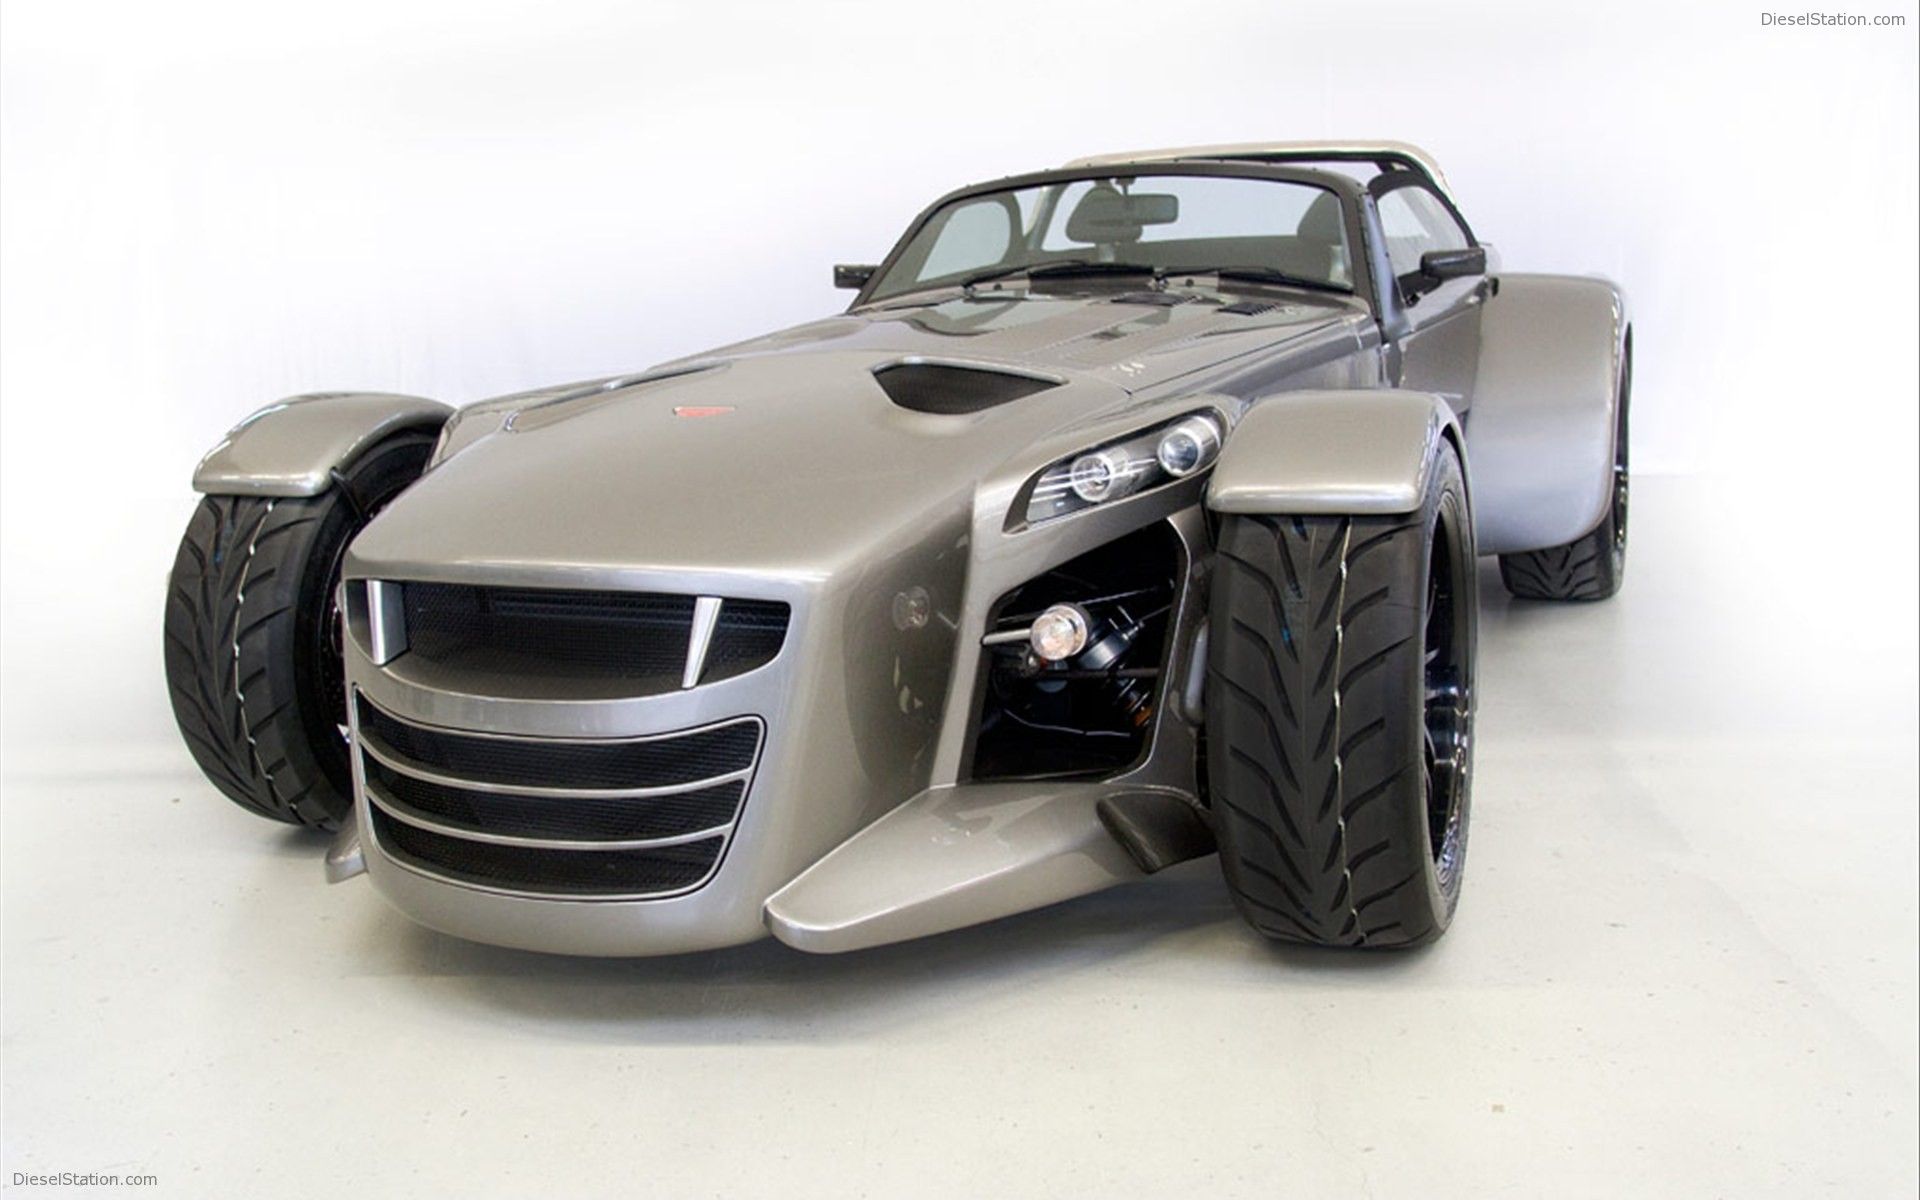 Donkervoort GTO 2013 Widescreen Exotic Car Wallpaper of 28